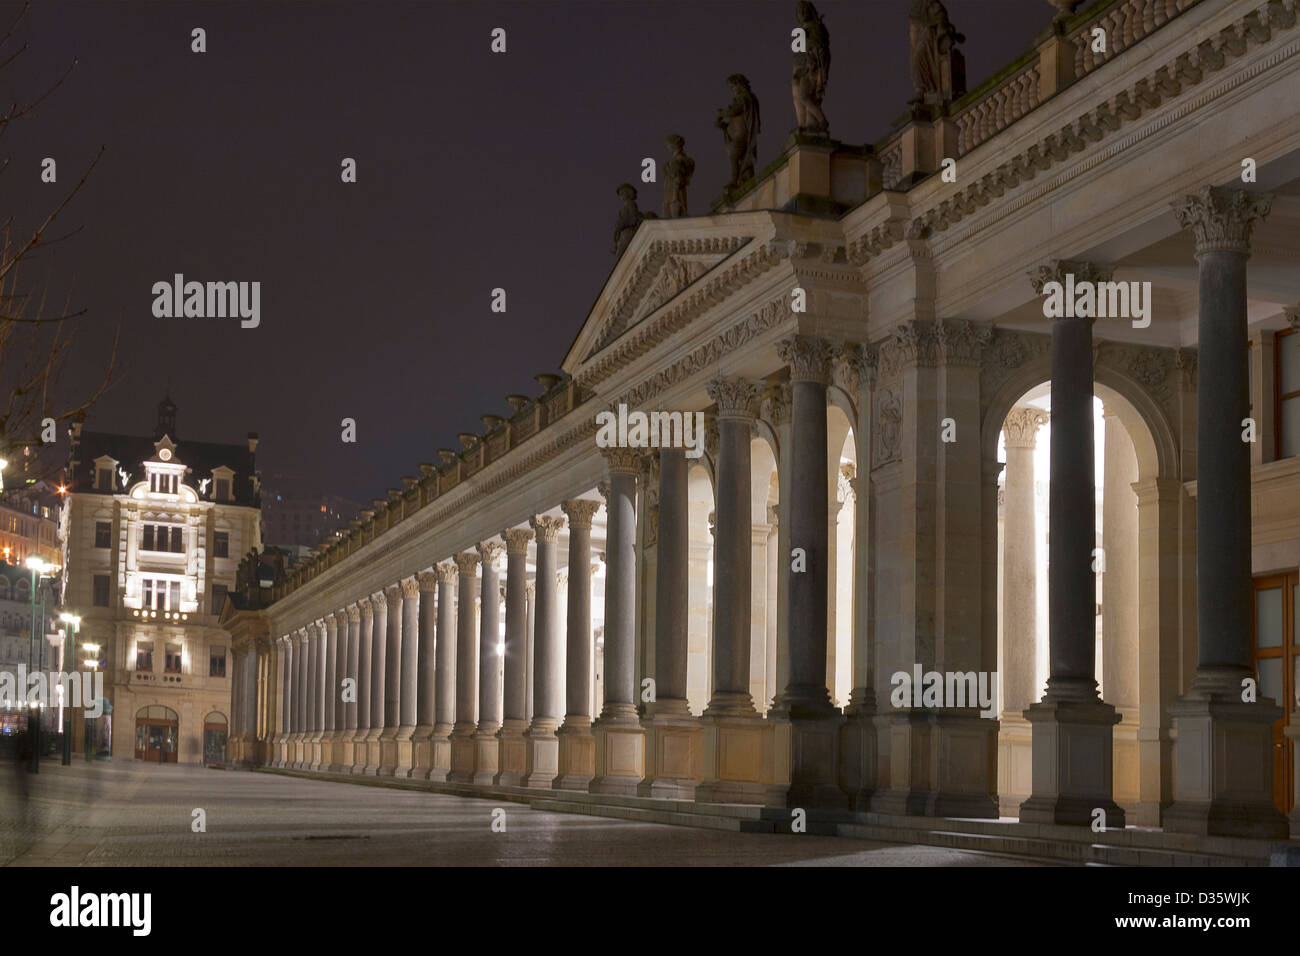 Night Karlovy Vary cityscape with Mill Colonnade, Czech Republic. Stock Photo